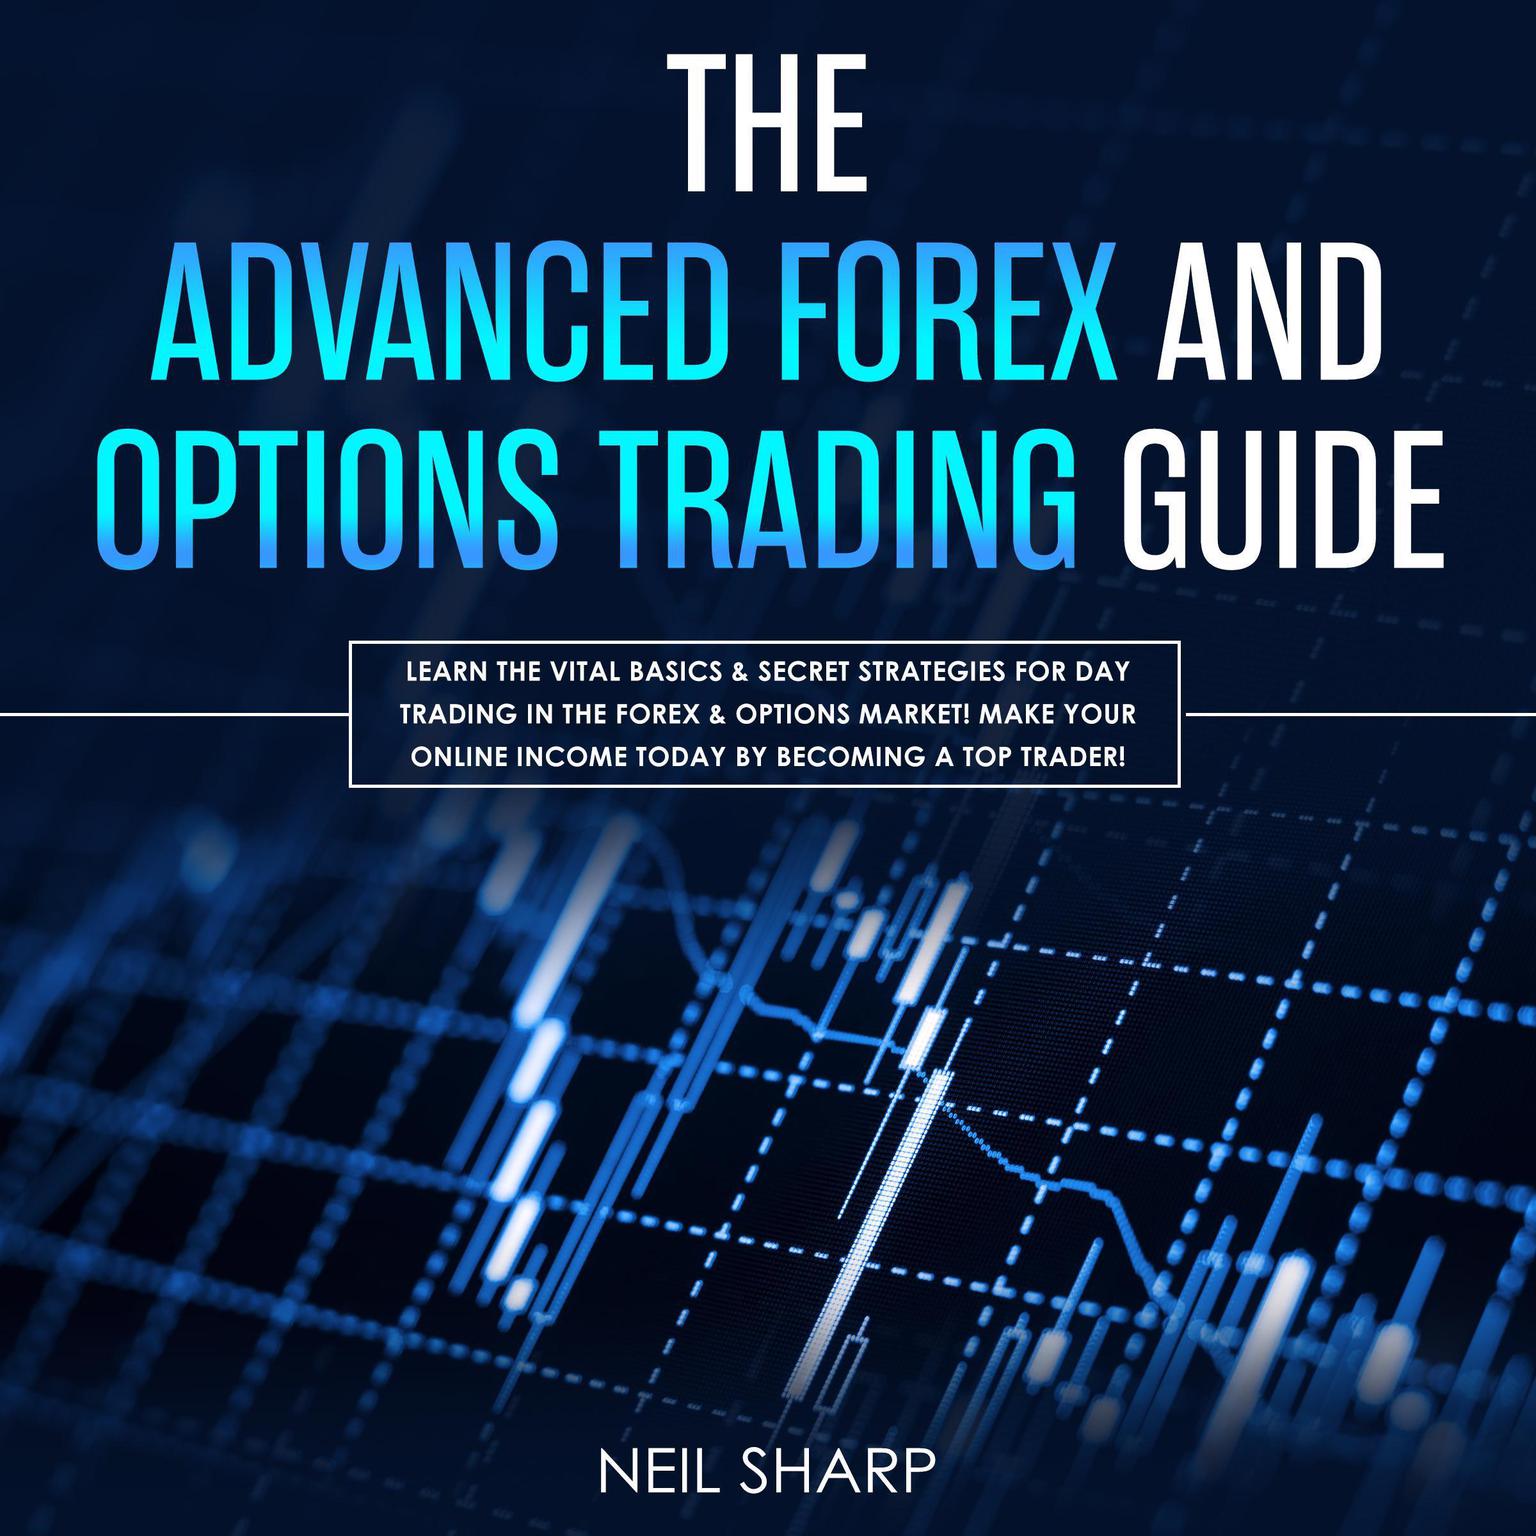 The Advanced Forex and Options Trading Guide: Learn the Vital Basics & Secret Strategies for Day Trading in the Forex & Options Market! Make Your Online Income Today by Becoming a Top Trader!: Learn the Vital Basics & Secret Strategies for Day Trading in the Forex & Options Market! Make Your Online Income Today by Becoming a Top Trader! Audiobook, by Neil Sharp